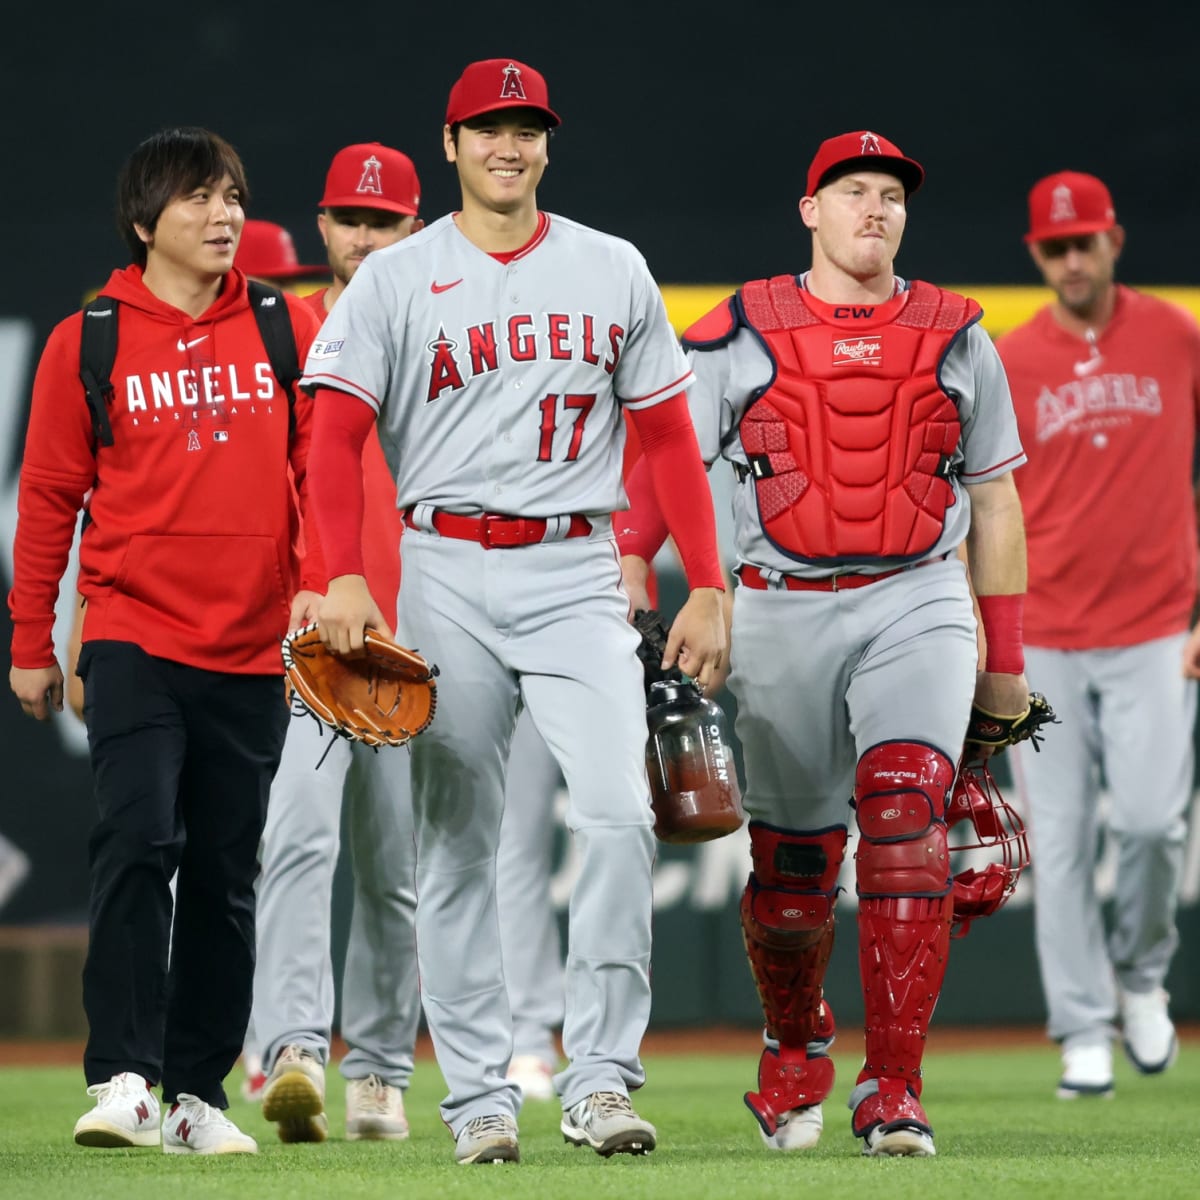 Angels Sit at Top Half of City Connect Jersey Rankings - Los